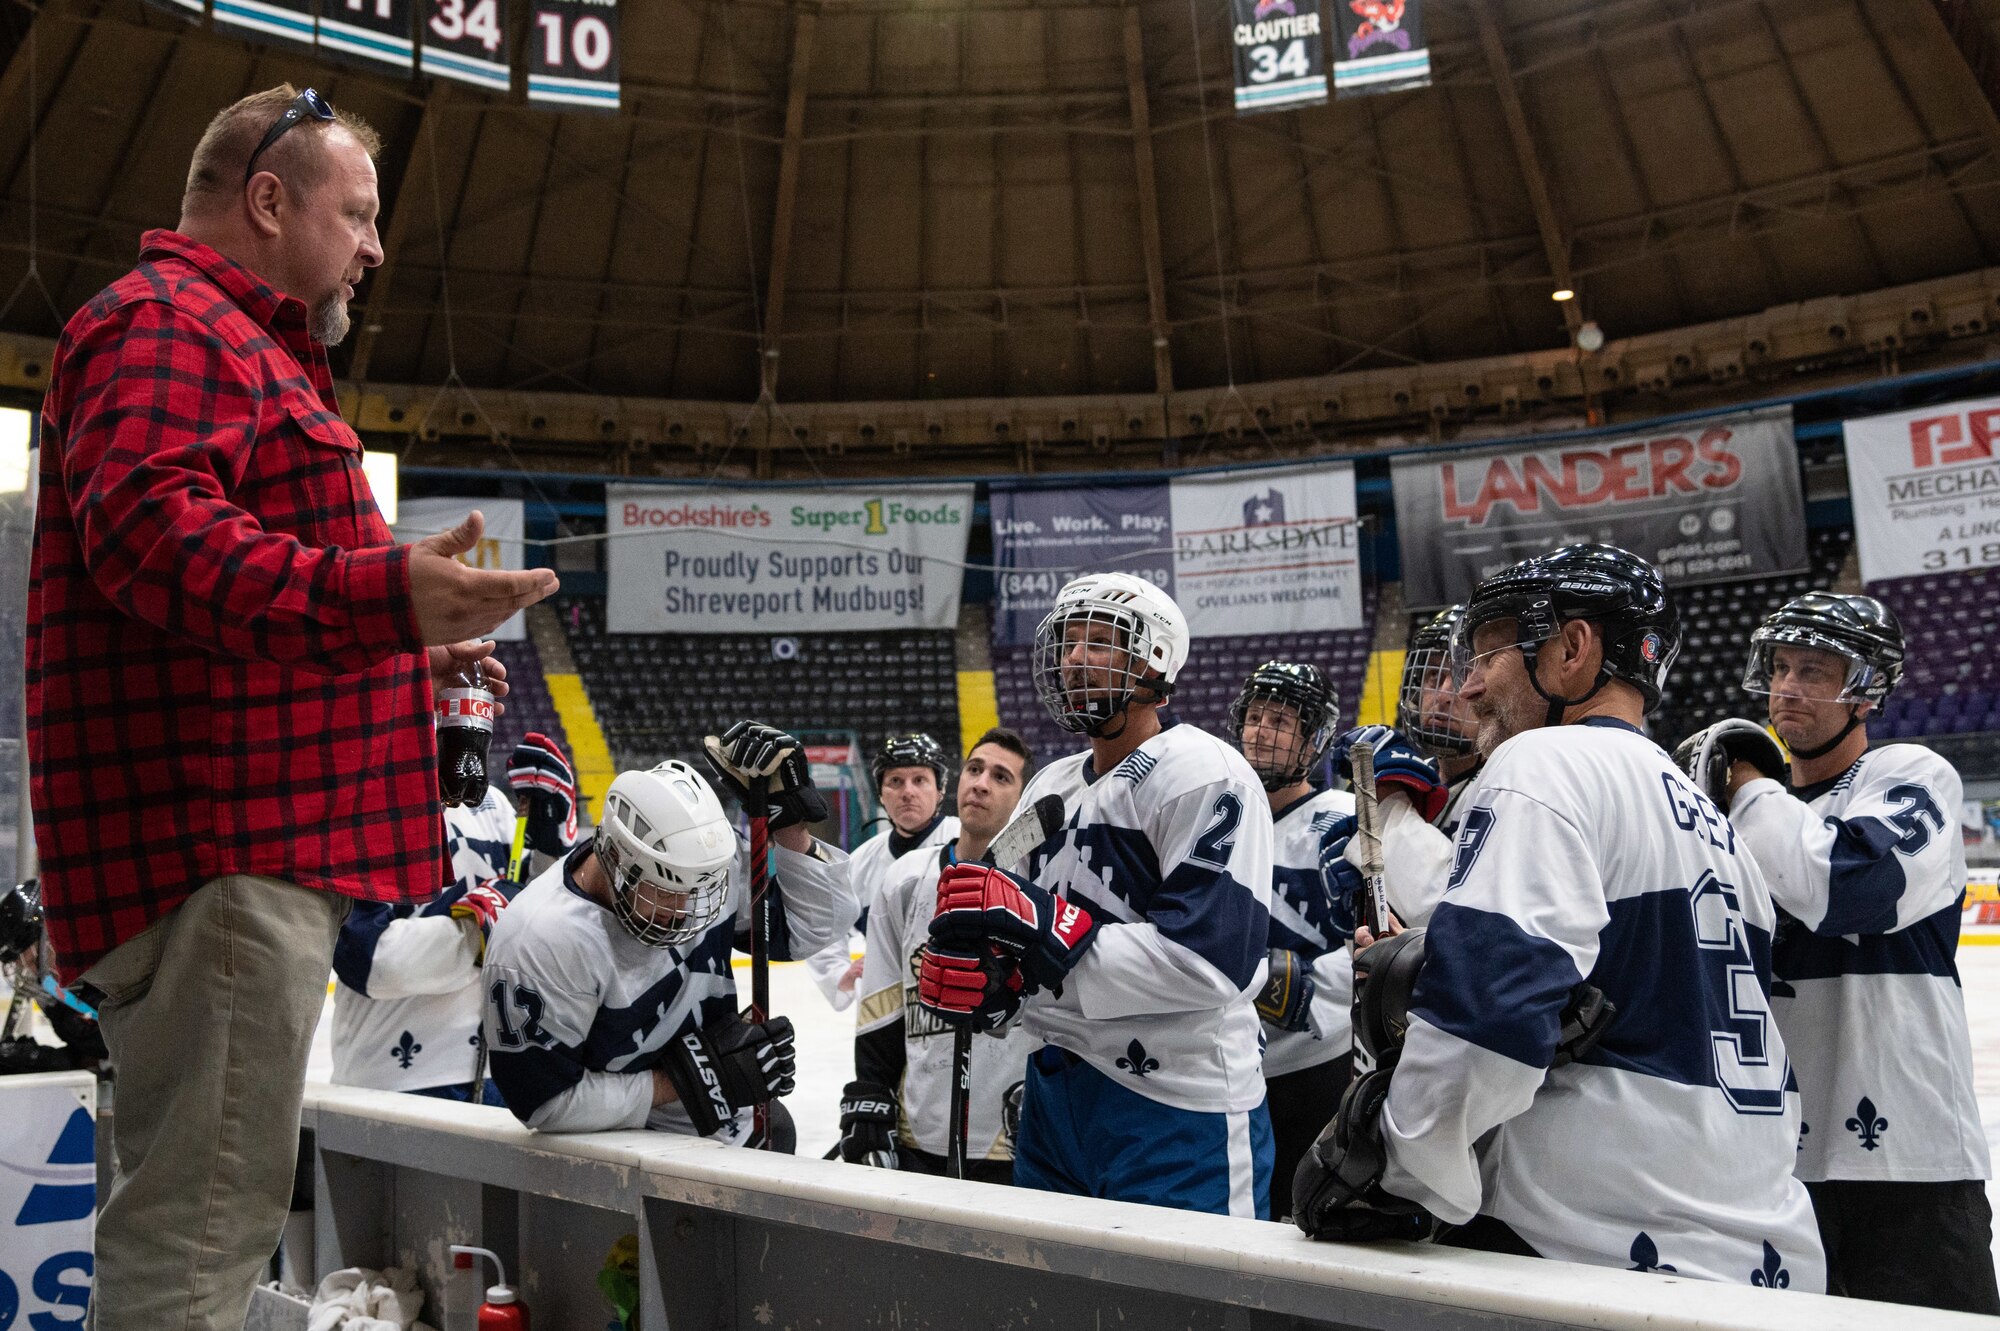 Airmen from the Barksdale Bombers hockey team from Barksdale Air Force Base, Louisiana, have a pre-game huddle before the Mudbugs Adult Hockey League championship game at the Hirsch Memorial Coliseum in Shreveport, Louisiana, March 31, 2021.